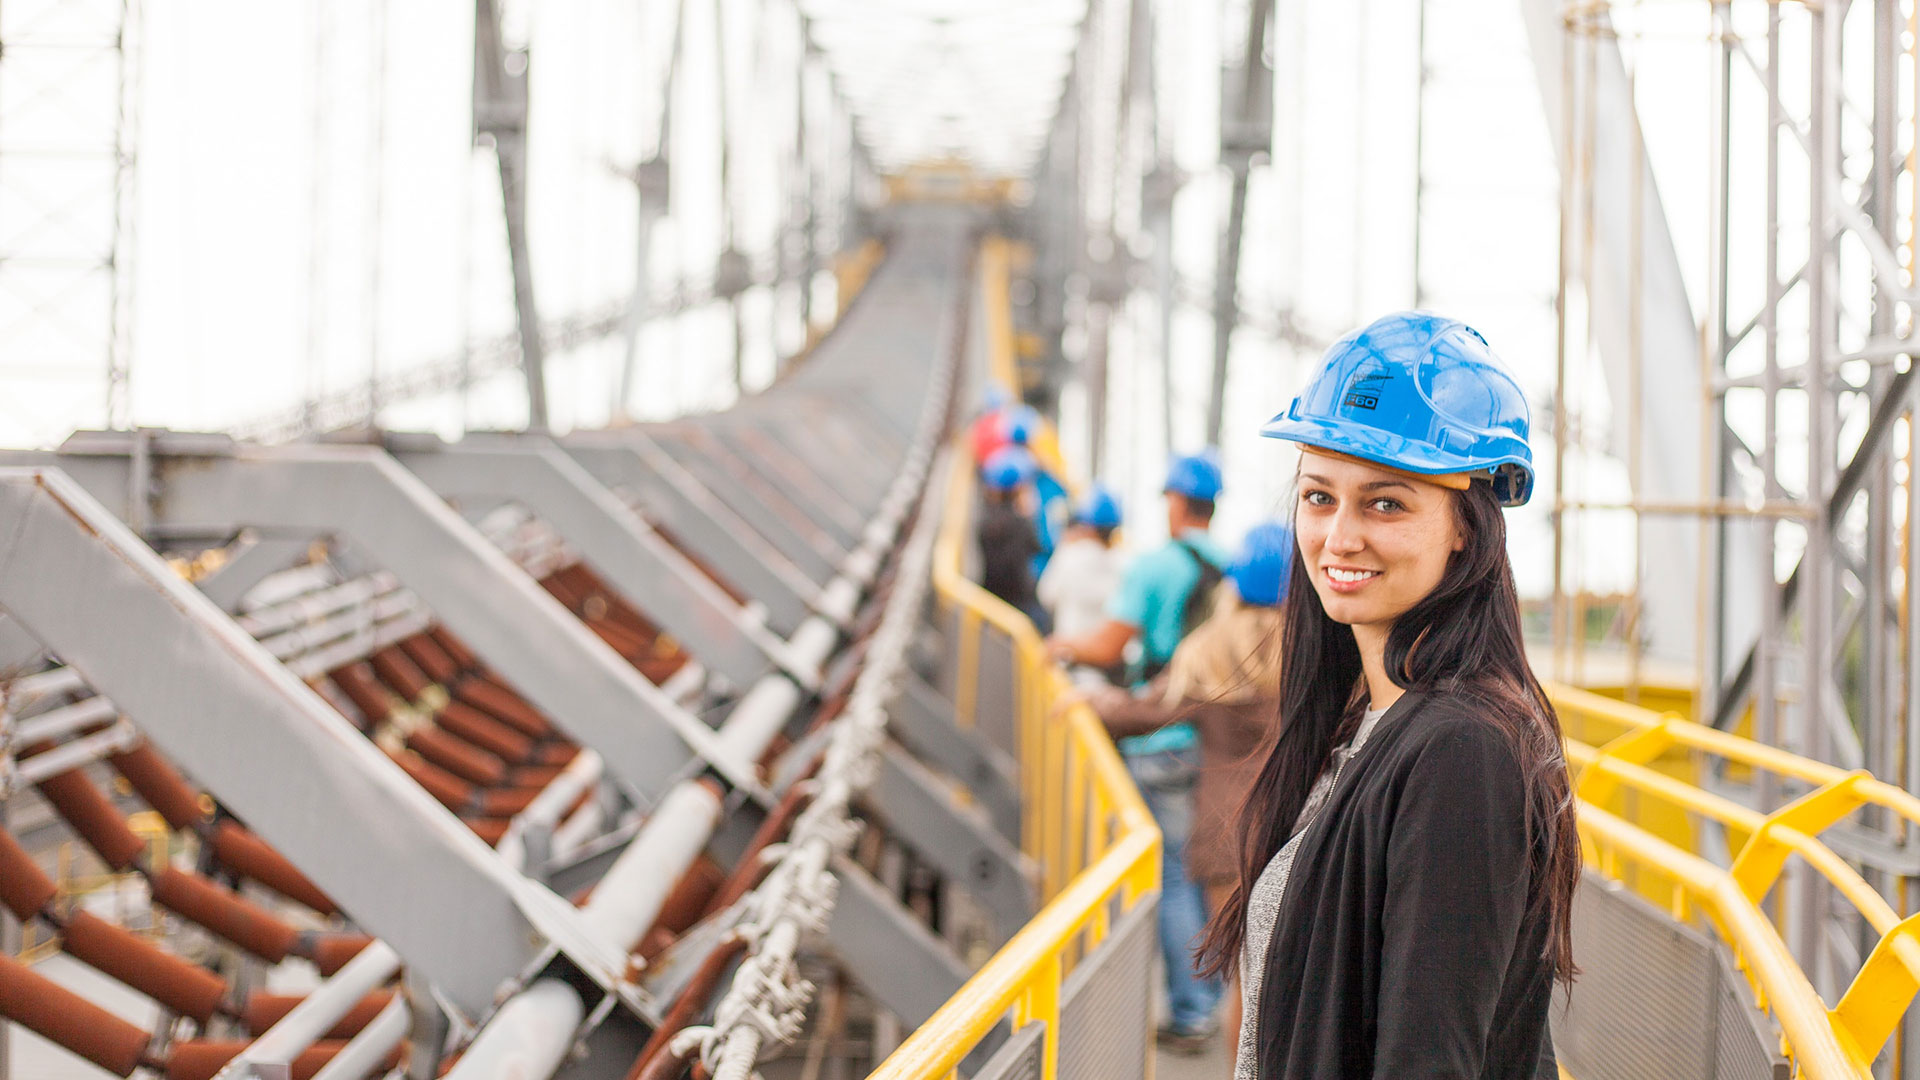 Person wearing blue hard hat and smiling